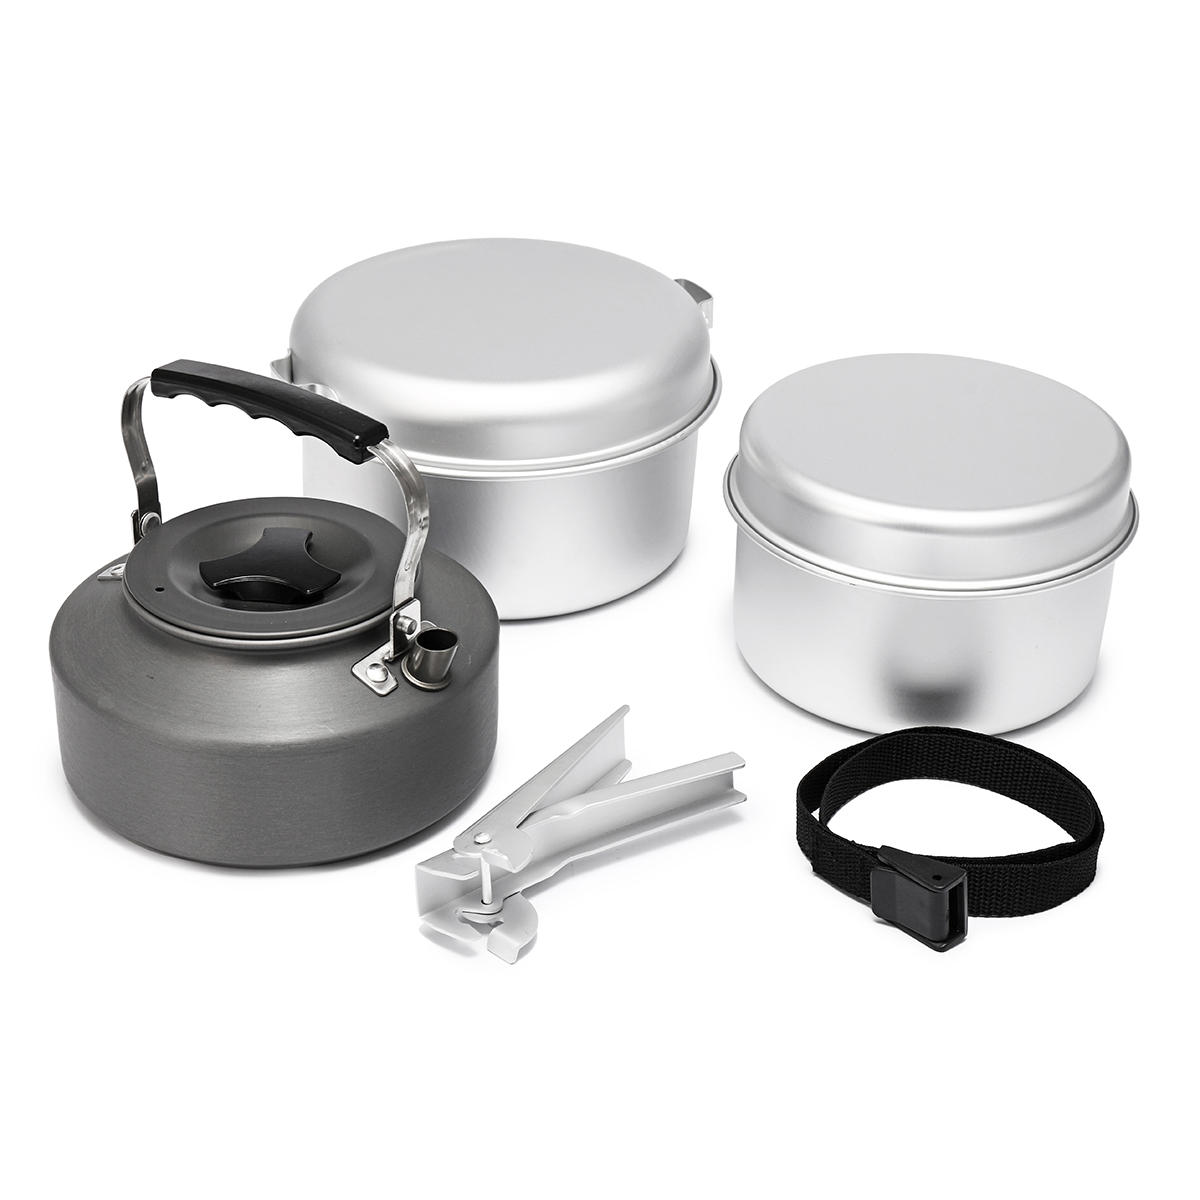 2-3 People Outdoor Camping Picnic Cookware Set Aluminium Kettle Pots Portable BBQ Tableware 